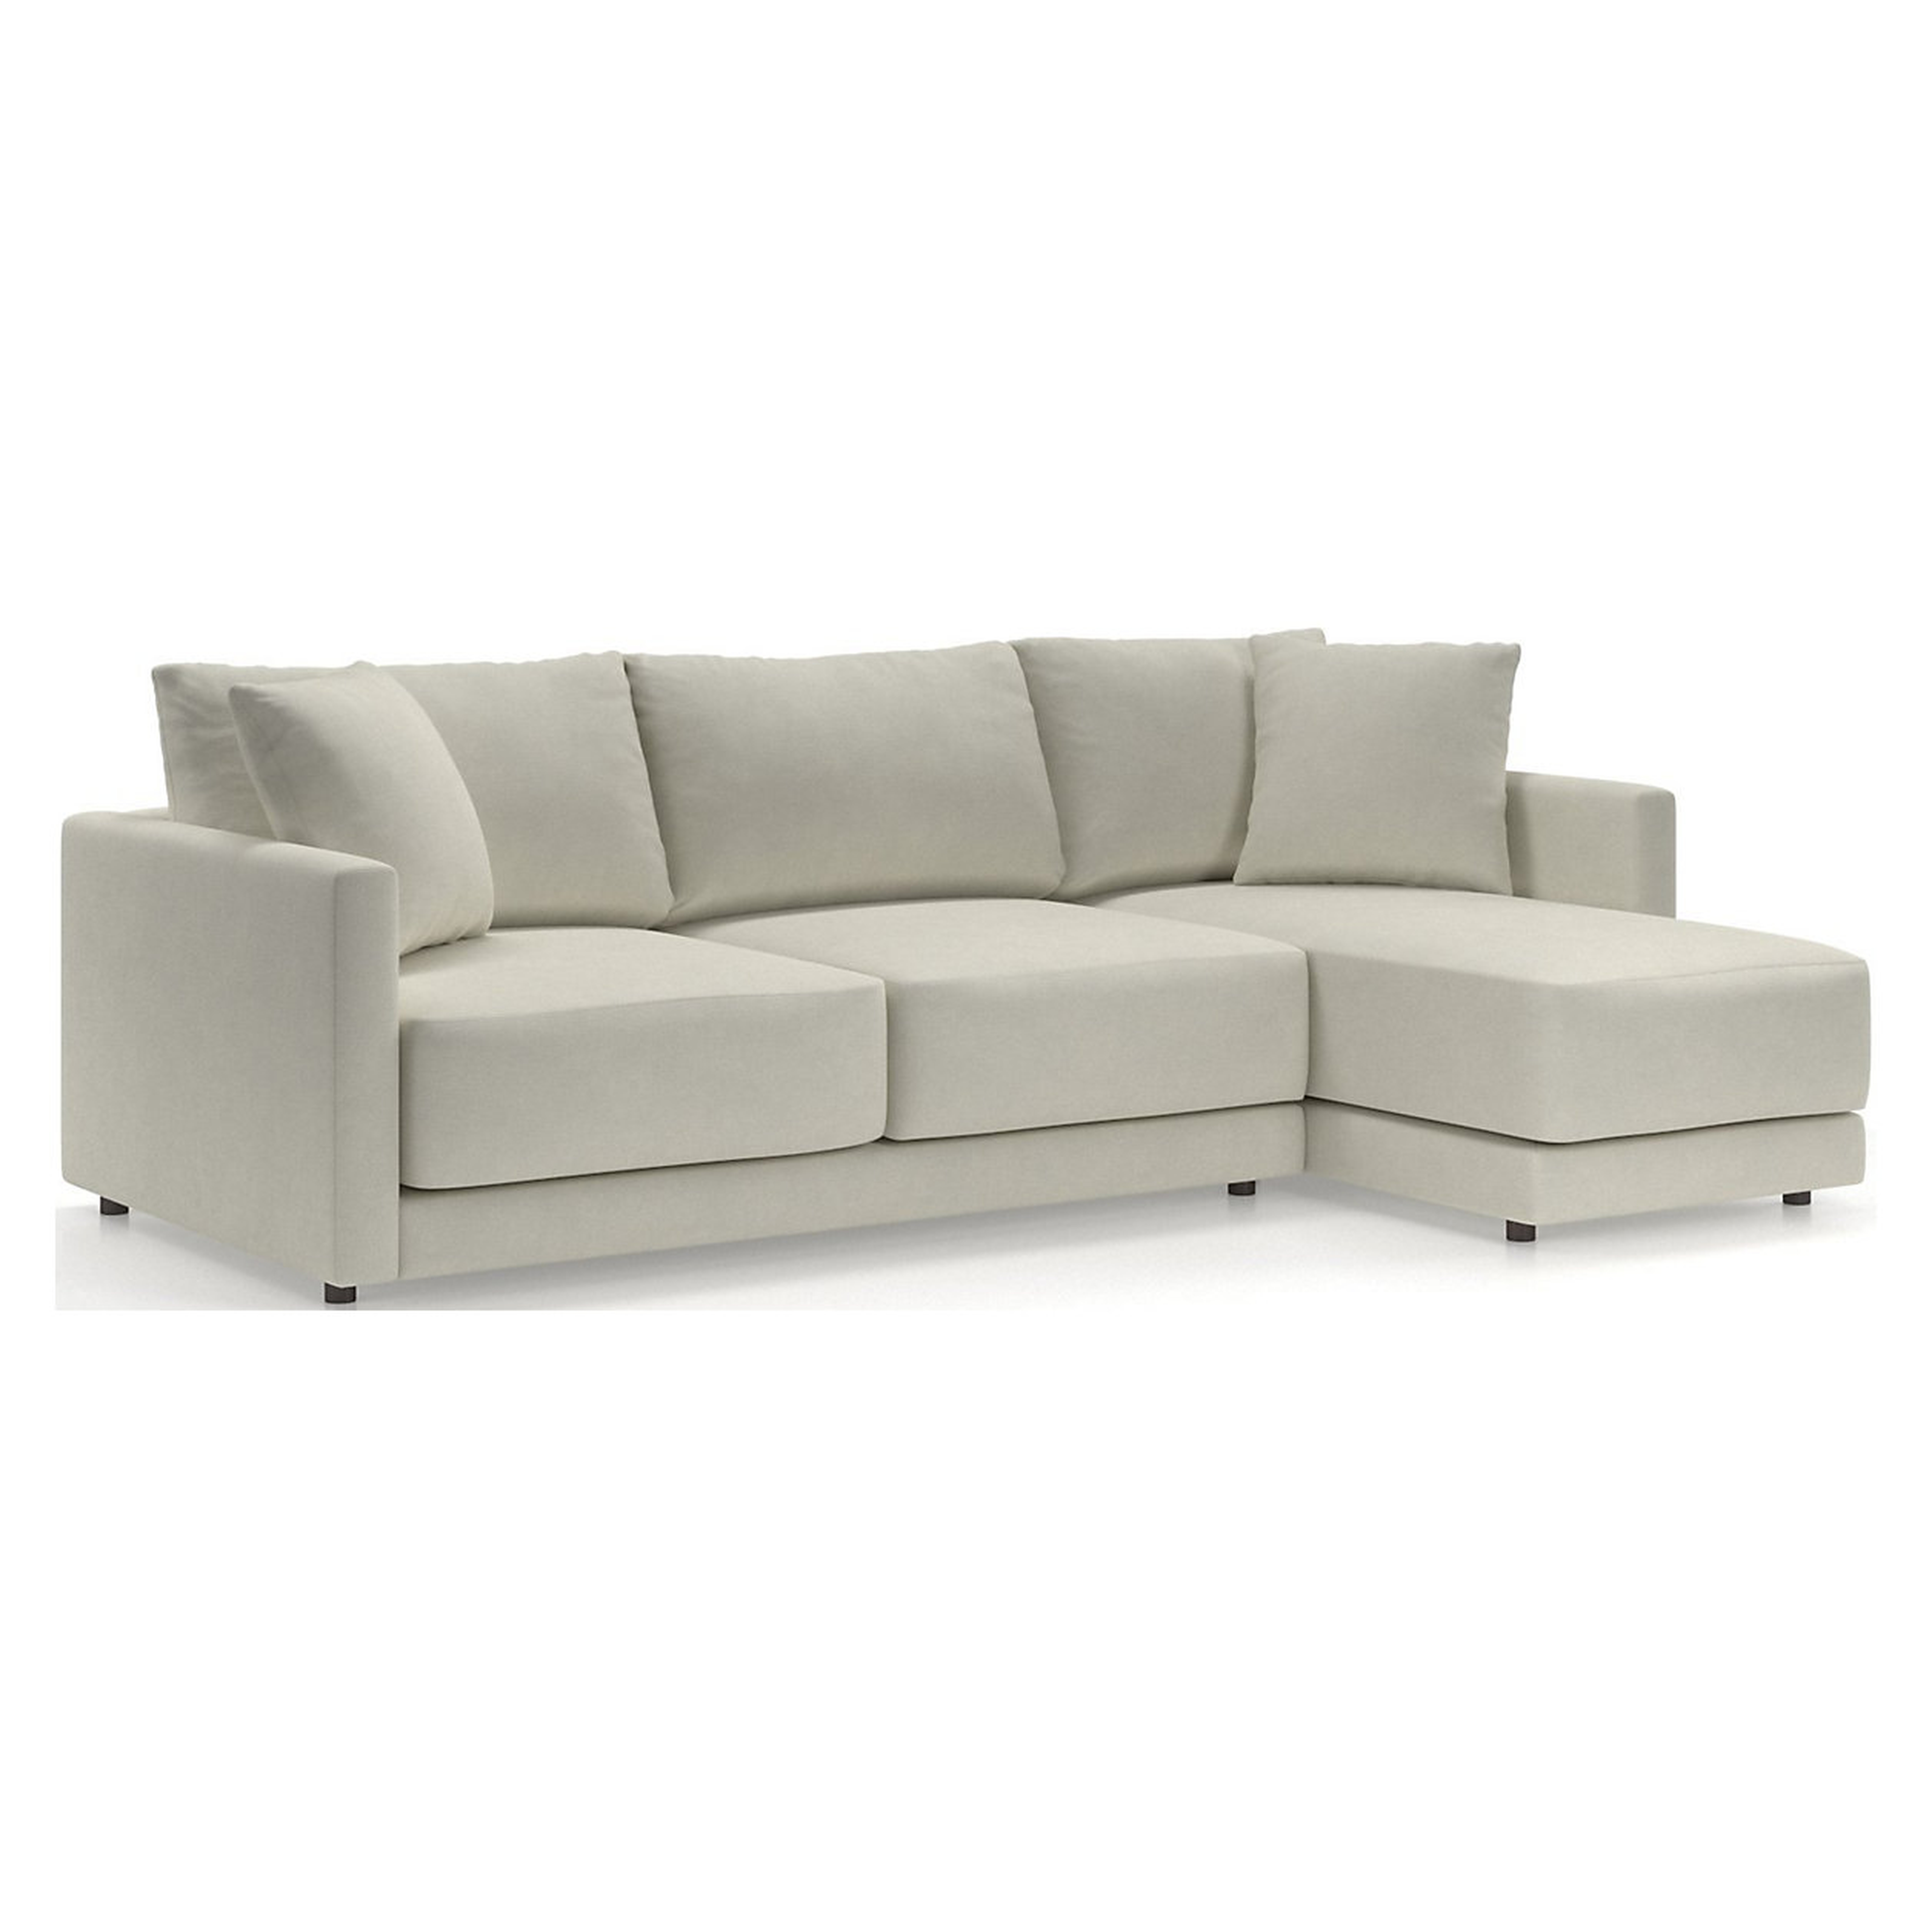 Gather Deep 2-Piece Right Arm Chaise Sectional - Crate and Barrel